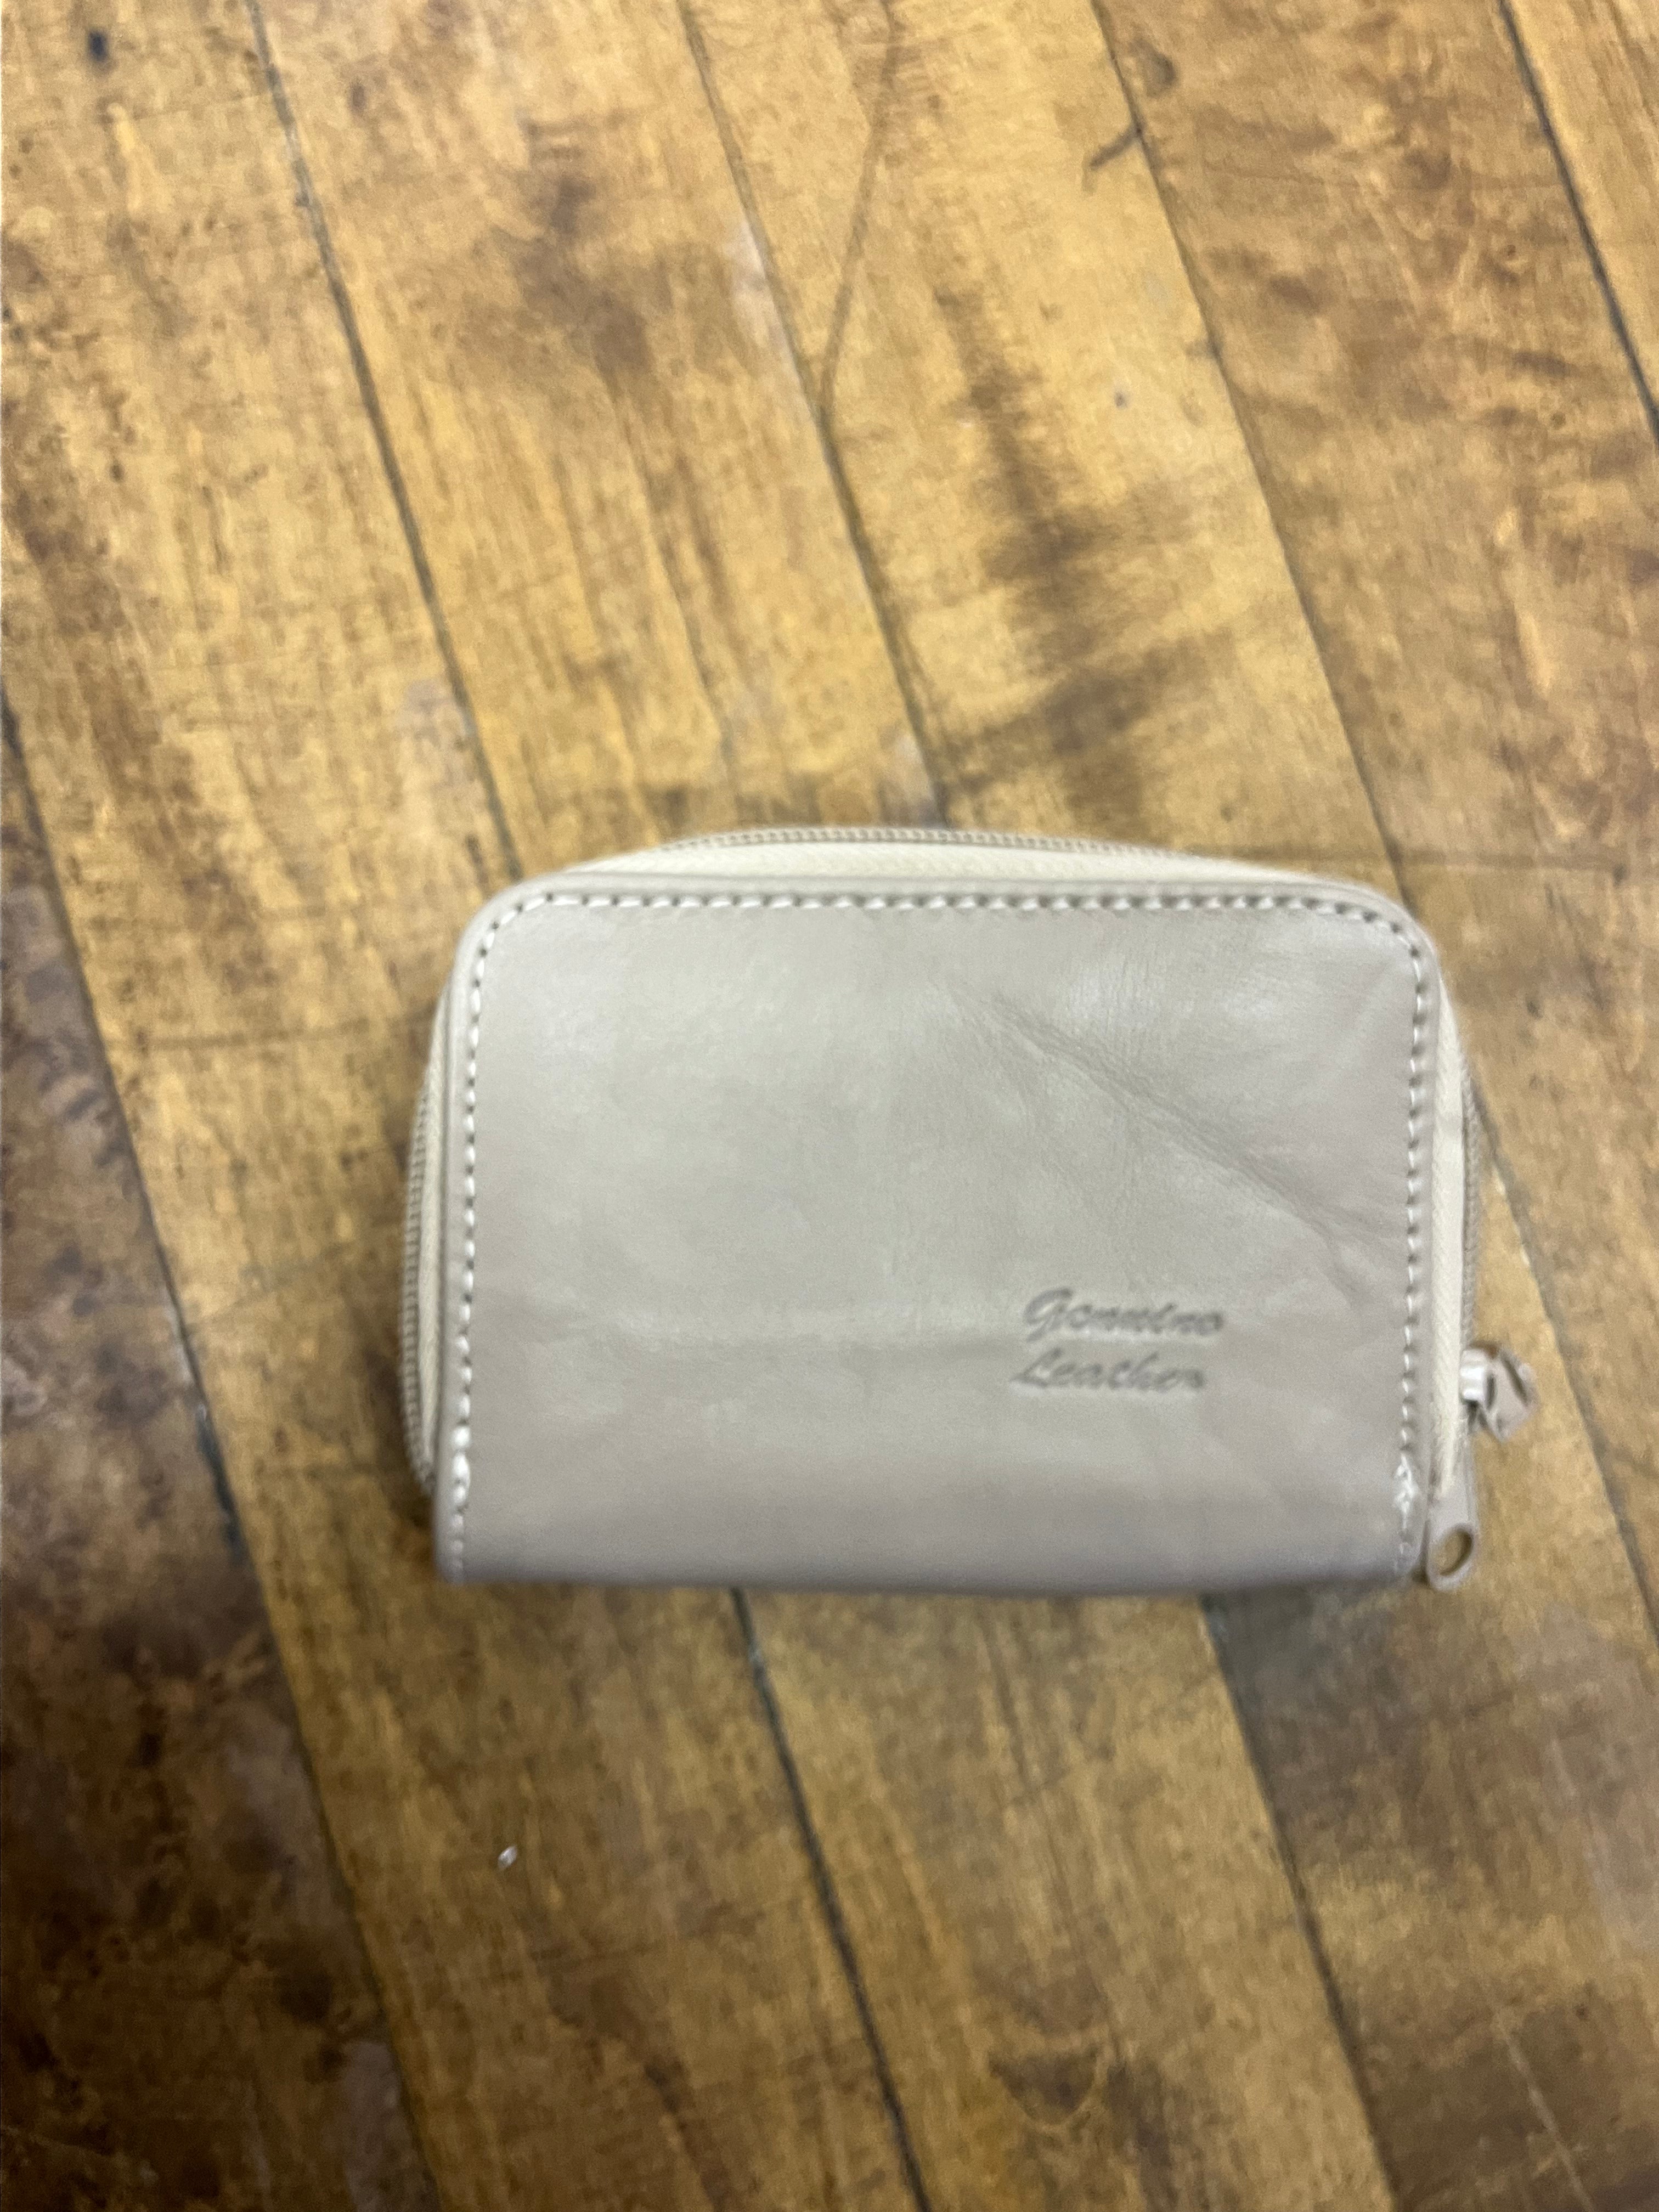 So Soft Leather Wallet